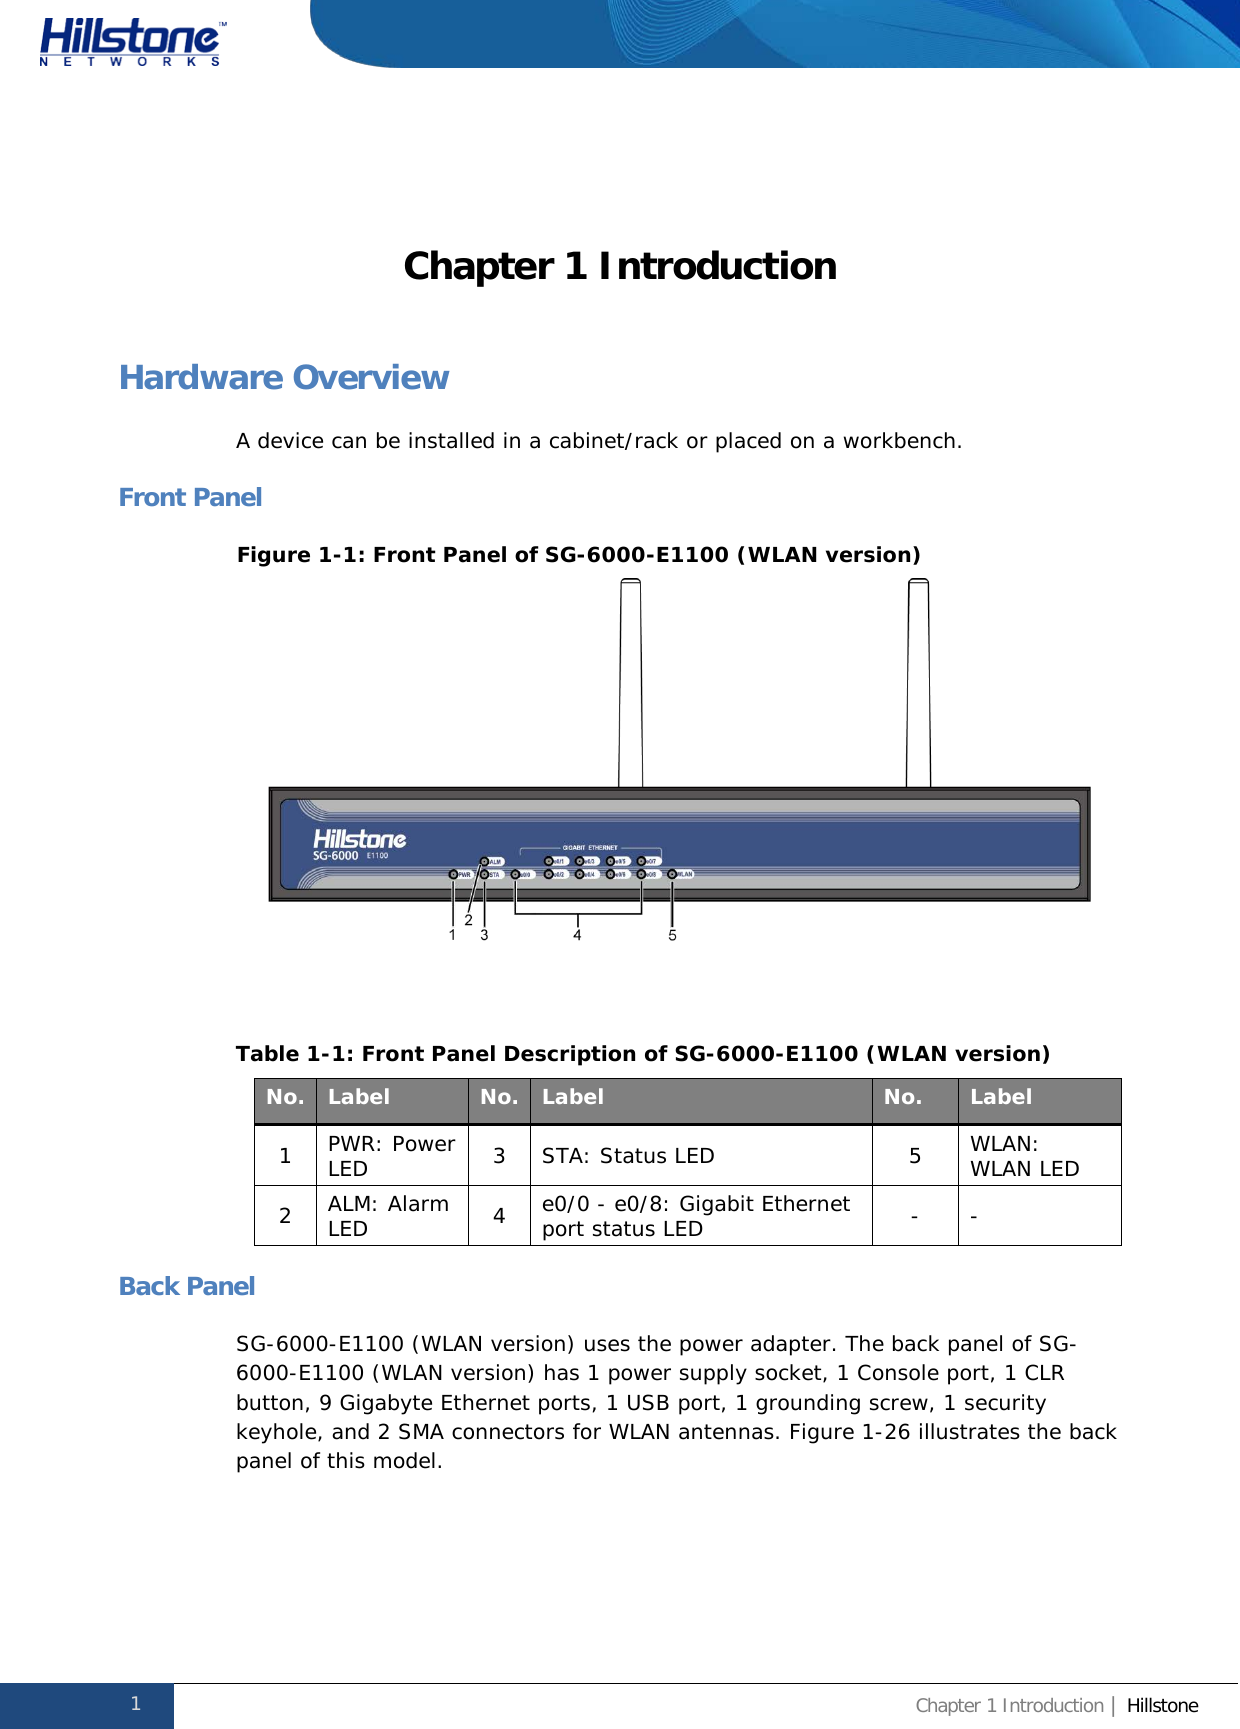              Hillstone  Hardware Reference Guide Chapter 1 Introduction Hardware Overview A device can be installed in a cabinet/rack or placed on a workbench. Front Panel Figure 1-1: Front Panel of SG-6000-E1100 (WLAN version)   Table 1-1: Front Panel Description of SG-6000-E1100 (WLAN version) No. Label No. Label No. Label 1  PWR: Power LED 3  STA: Status LED  5  WLAN: WLAN LED 2  ALM: Alarm LED 4  e0/0 - e0/8: Gigabit Ethernet port status LED -  - Back Panel SG-6000-E1100 (WLAN version) uses the power adapter. The back panel of SG-6000-E1100 (WLAN version) has 1 power supply socket, 1 Console port, 1 CLR button, 9 Gigabyte Ethernet ports, 1 USB port, 1 grounding screw, 1 security keyhole, and 2 SMA connectors for WLAN antennas. Figure 1-26 illustrates the back panel of this model. 1 Chapter 1 Introduction | Hillstone  